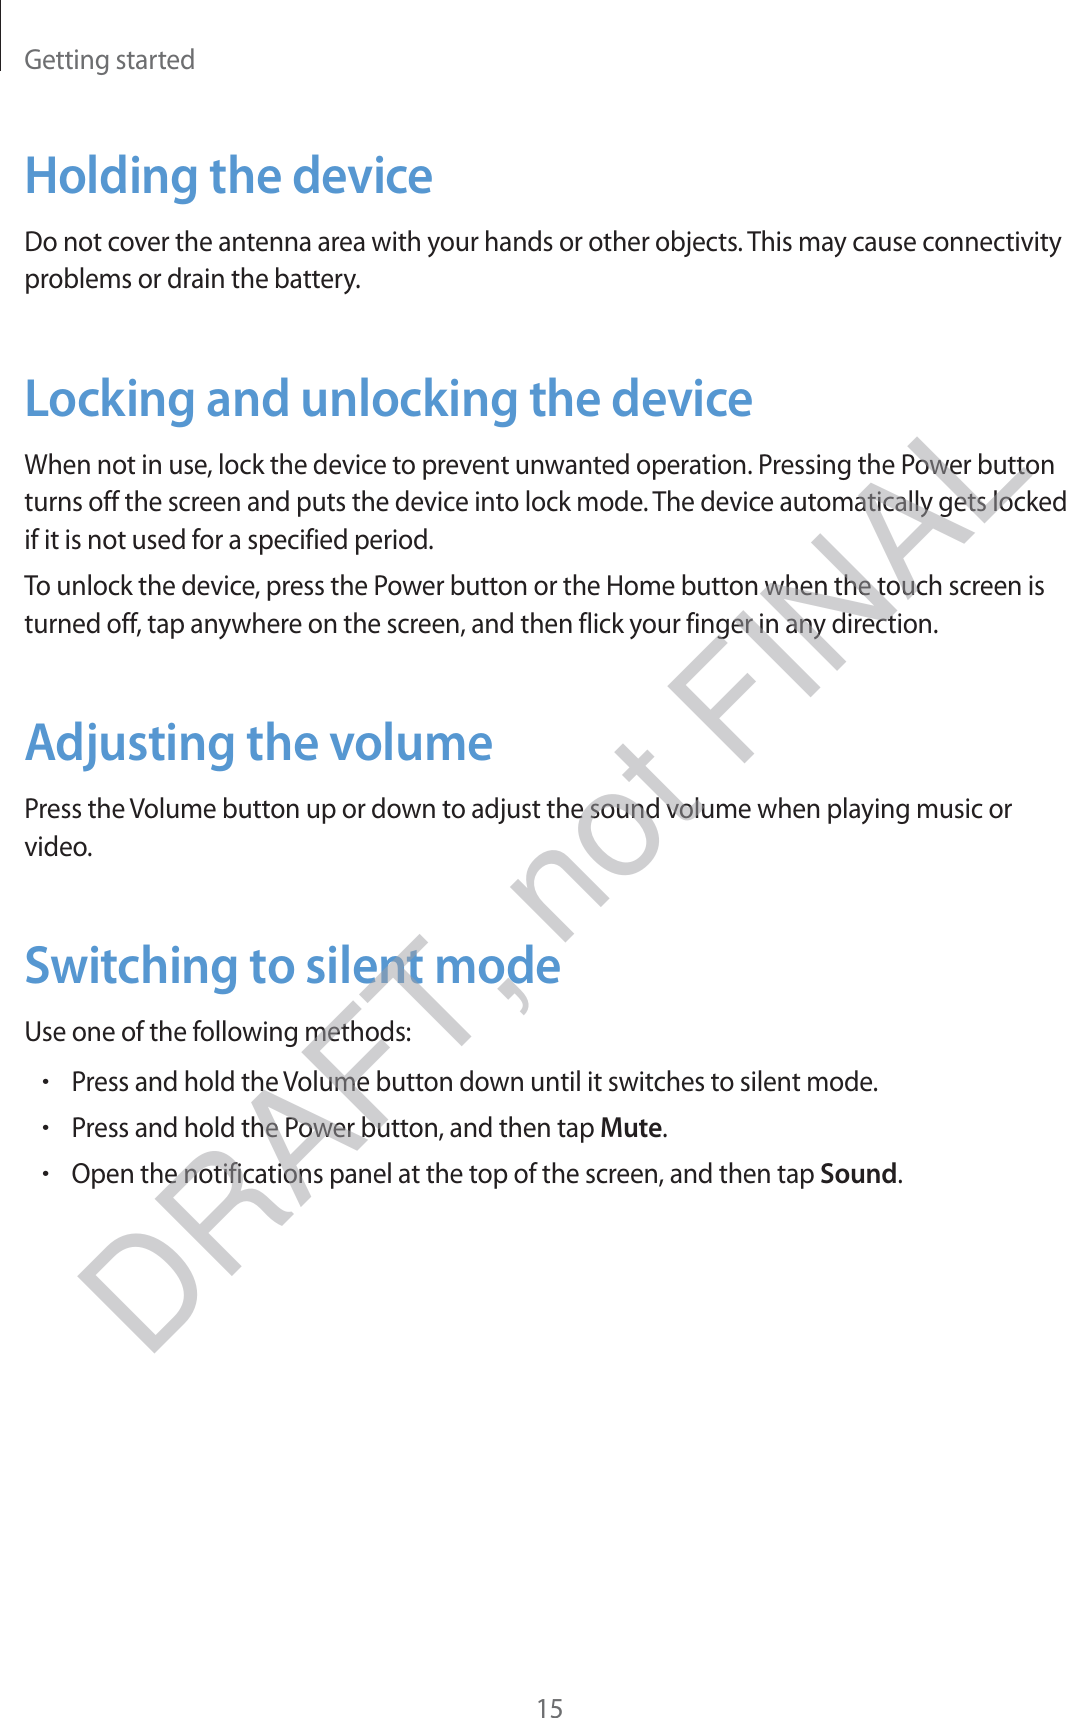 Getting started15Holding the deviceDo not cover the antenna area with your hands or other objects. This may cause connectivity problems or drain the battery.Locking and unlocking the deviceWhen not in use, lock the device to prevent unwanted operation. Pressing the Power button turns off the screen and puts the device into lock mode. The device automatically gets locked if it is not used for a specified period.To unlock the device, press the Power button or the Home button when the touch screen is turned off, tap anywhere on the screen, and then flick your finger in any direction.Adjusting the volumePress the Volume button up or down to adjust the sound volume when playing music or video.Switching to silent modeUse one of the following methods:rPress and hold the Volume button down until it switches to silent mode.rPress and hold the Power button, and then tap Mute.rOpen the notifications panel at the top of the screen, and then tap Sound.DRAFT, not FINAL